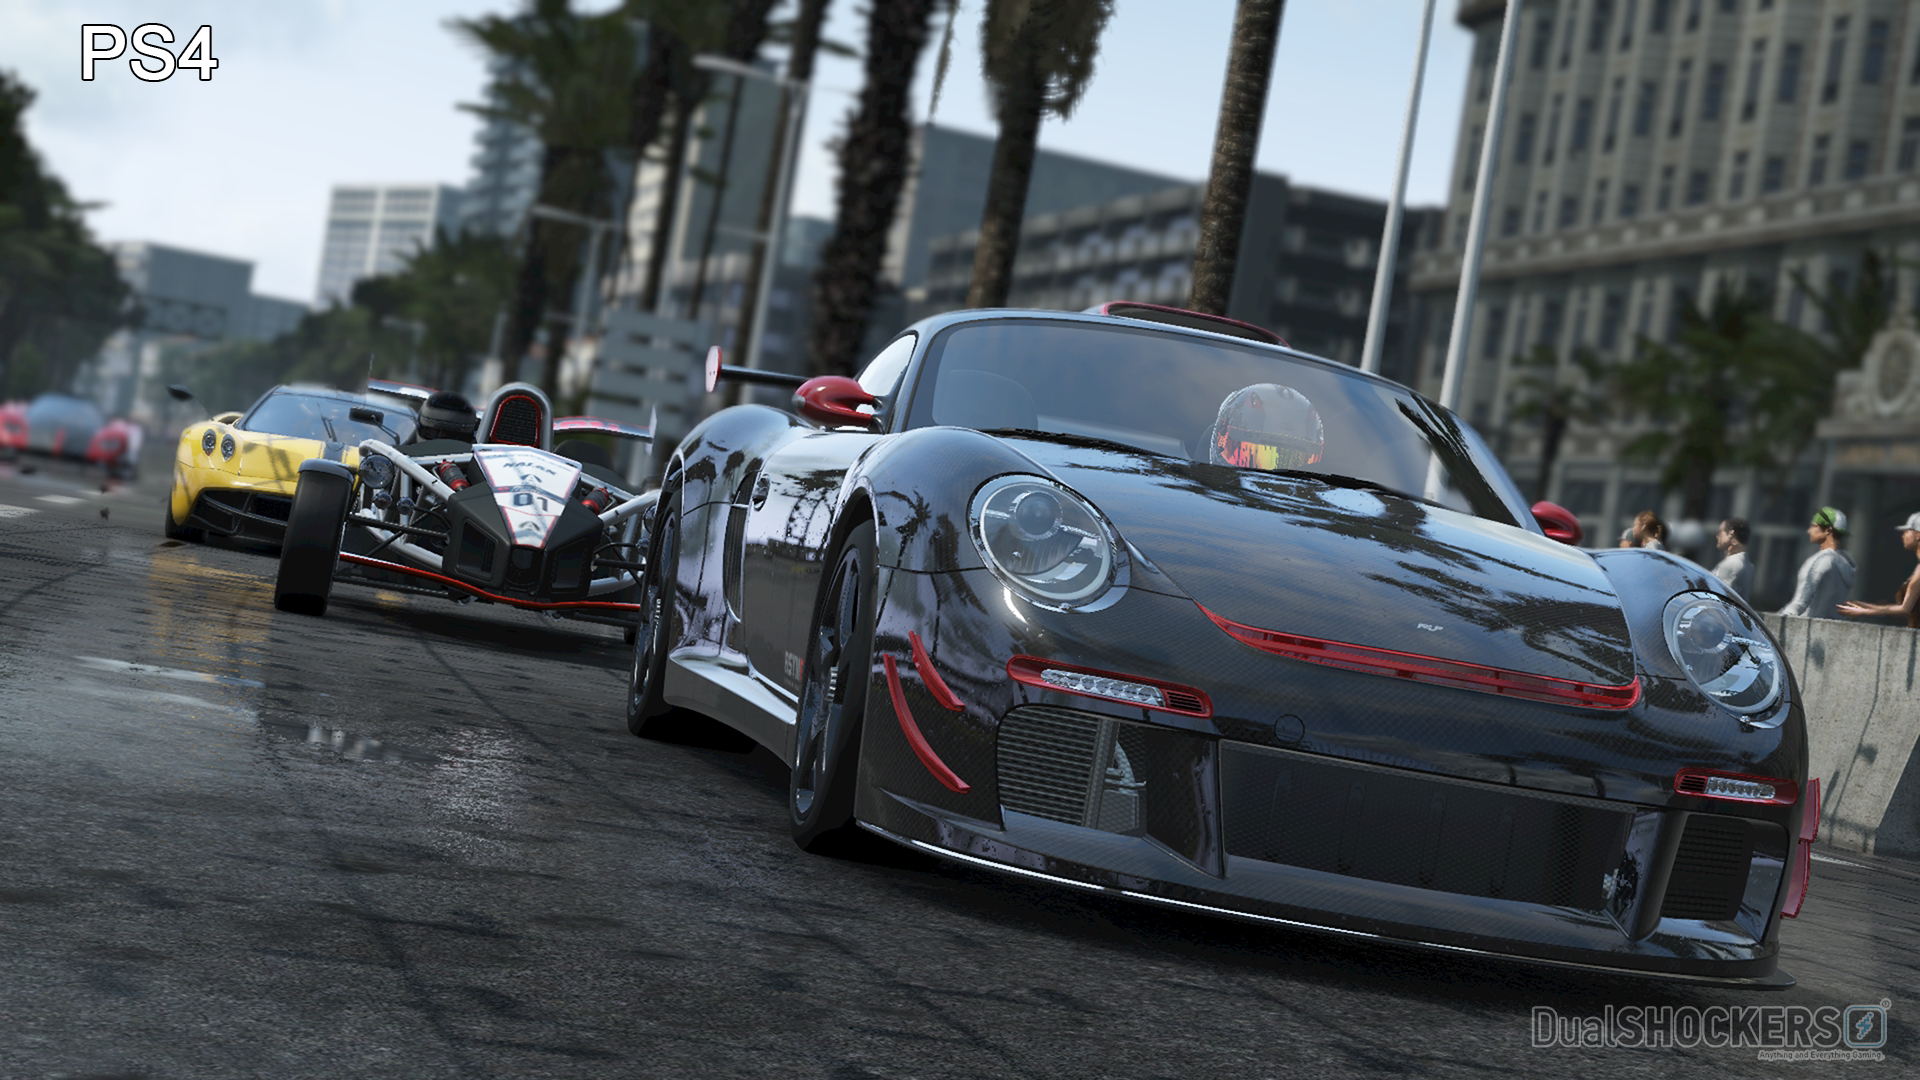 Ps4 project. Project cars ps4. Project cars 3. Проджект карс 4. PLAYSTATION 4 Project cars.